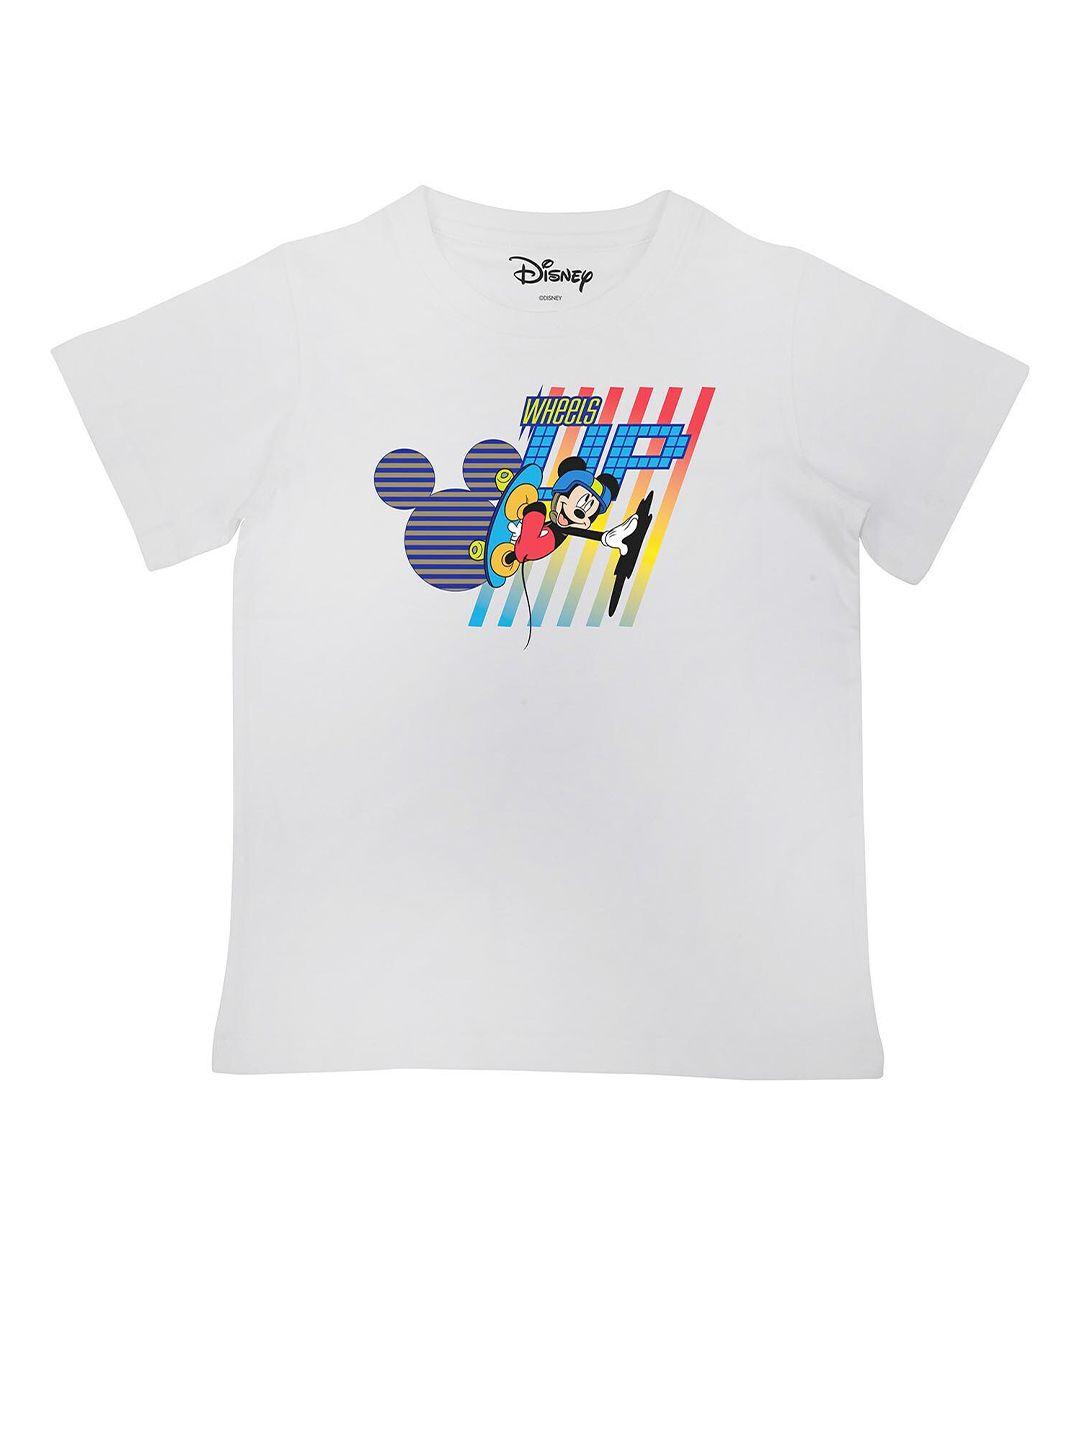 disney by wear your mind boys white printed v-neck t-shirt